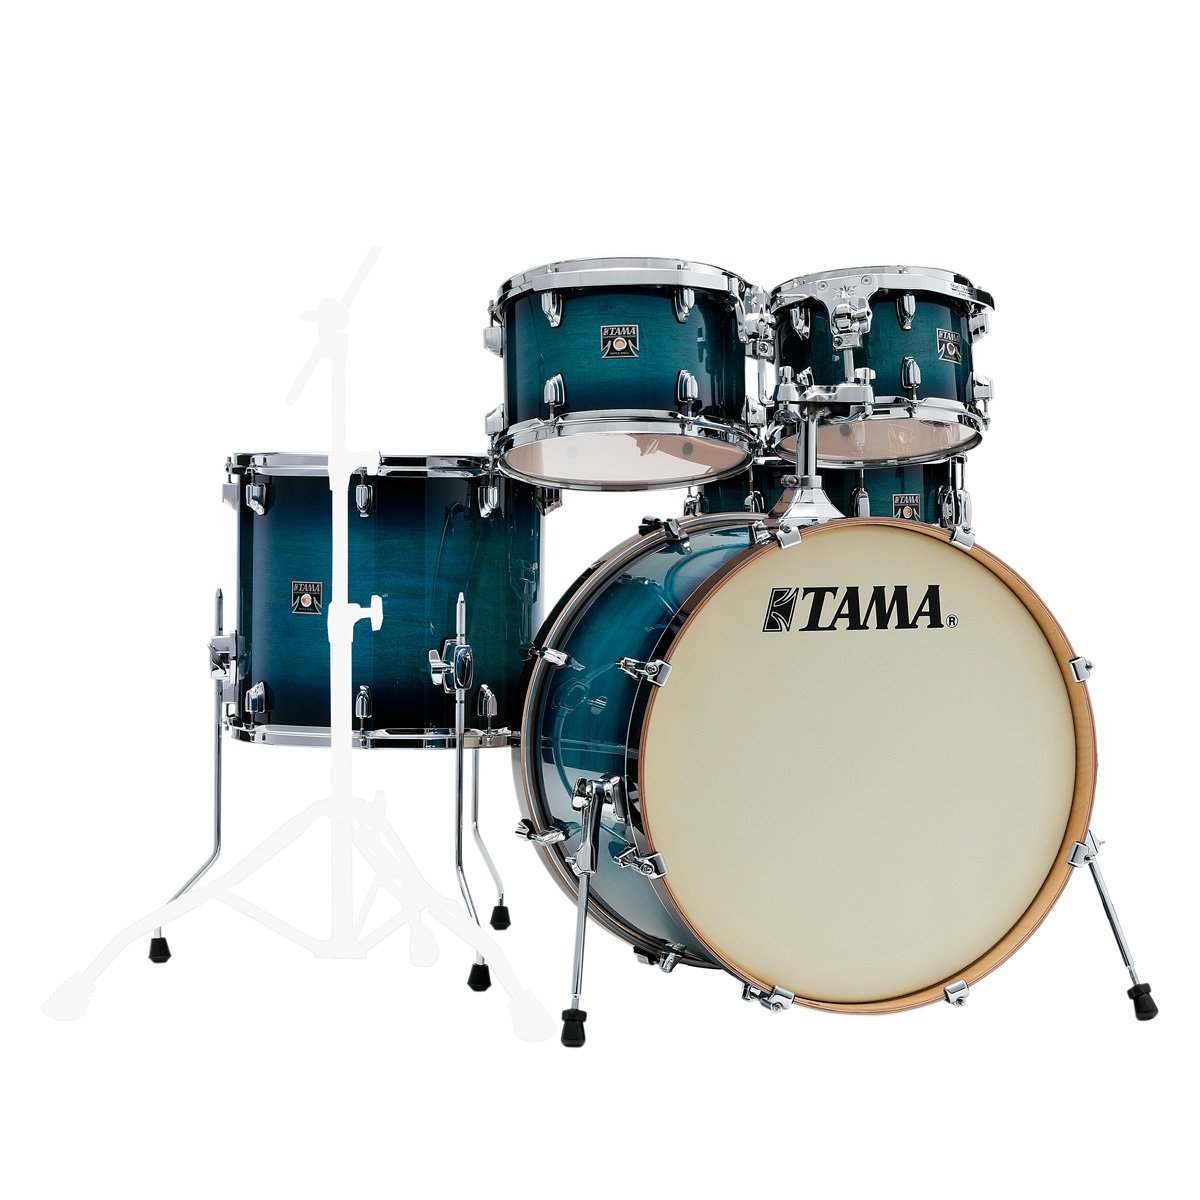 TAMA / CL52KRS-BAB Superstar Classic ドラムシェルキット【お取り寄せ商品】